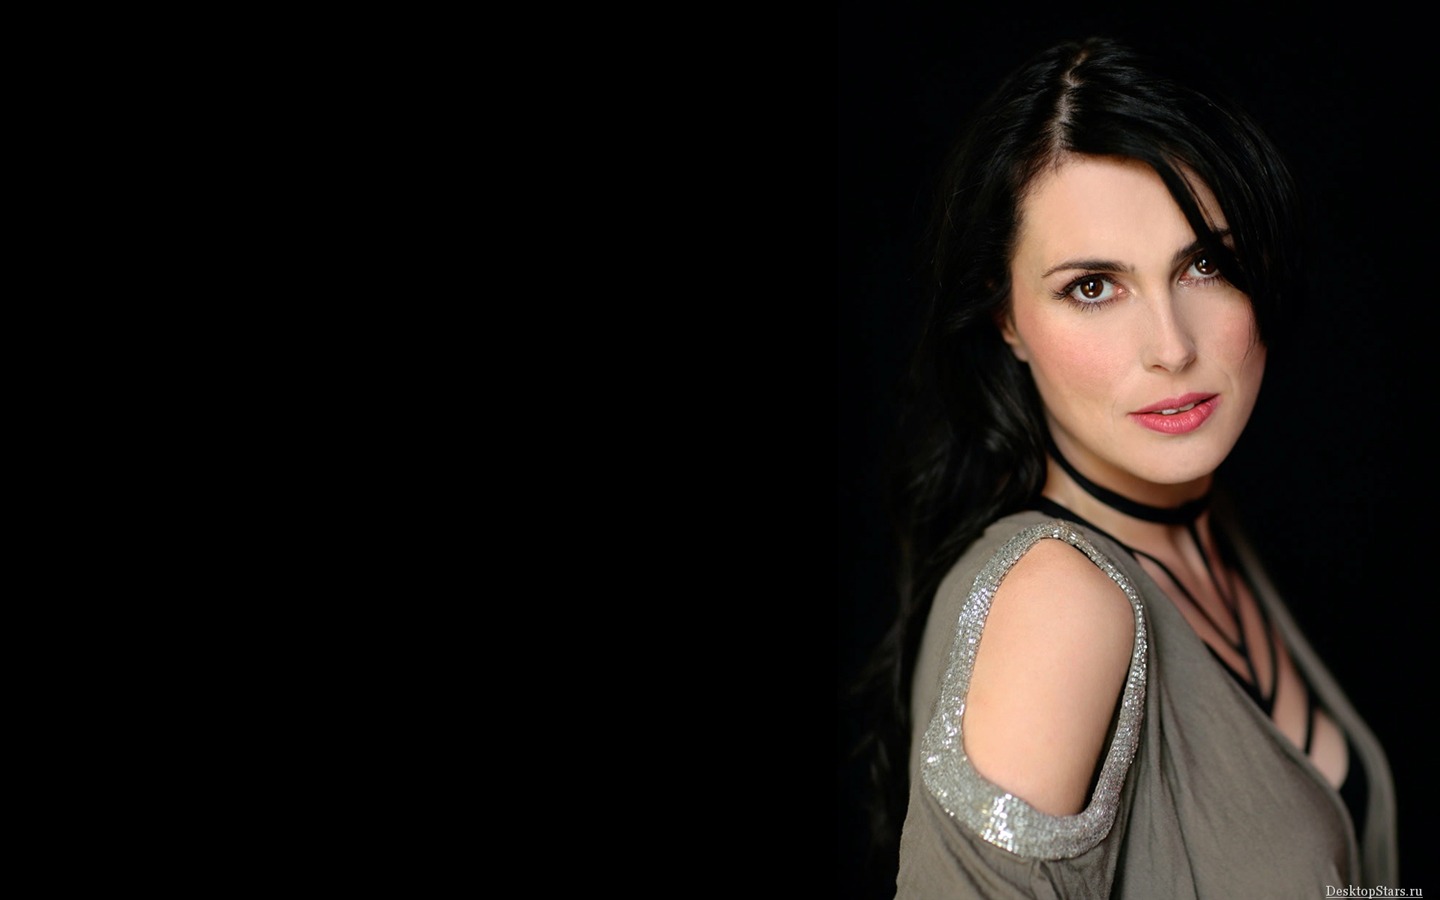 Sharon den Adel #004 - 1440x900 Wallpapers Pictures Photos Images